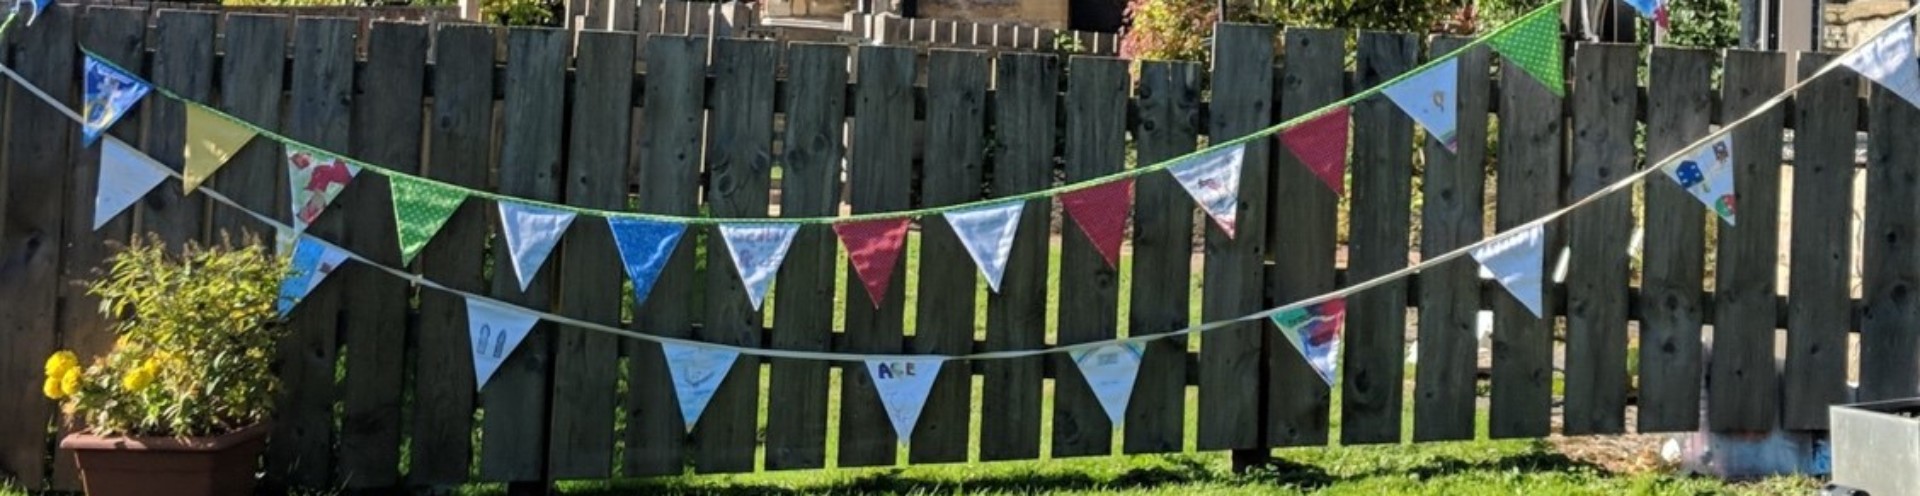 Beautiful bunting flags showcasing outside after community bunting project